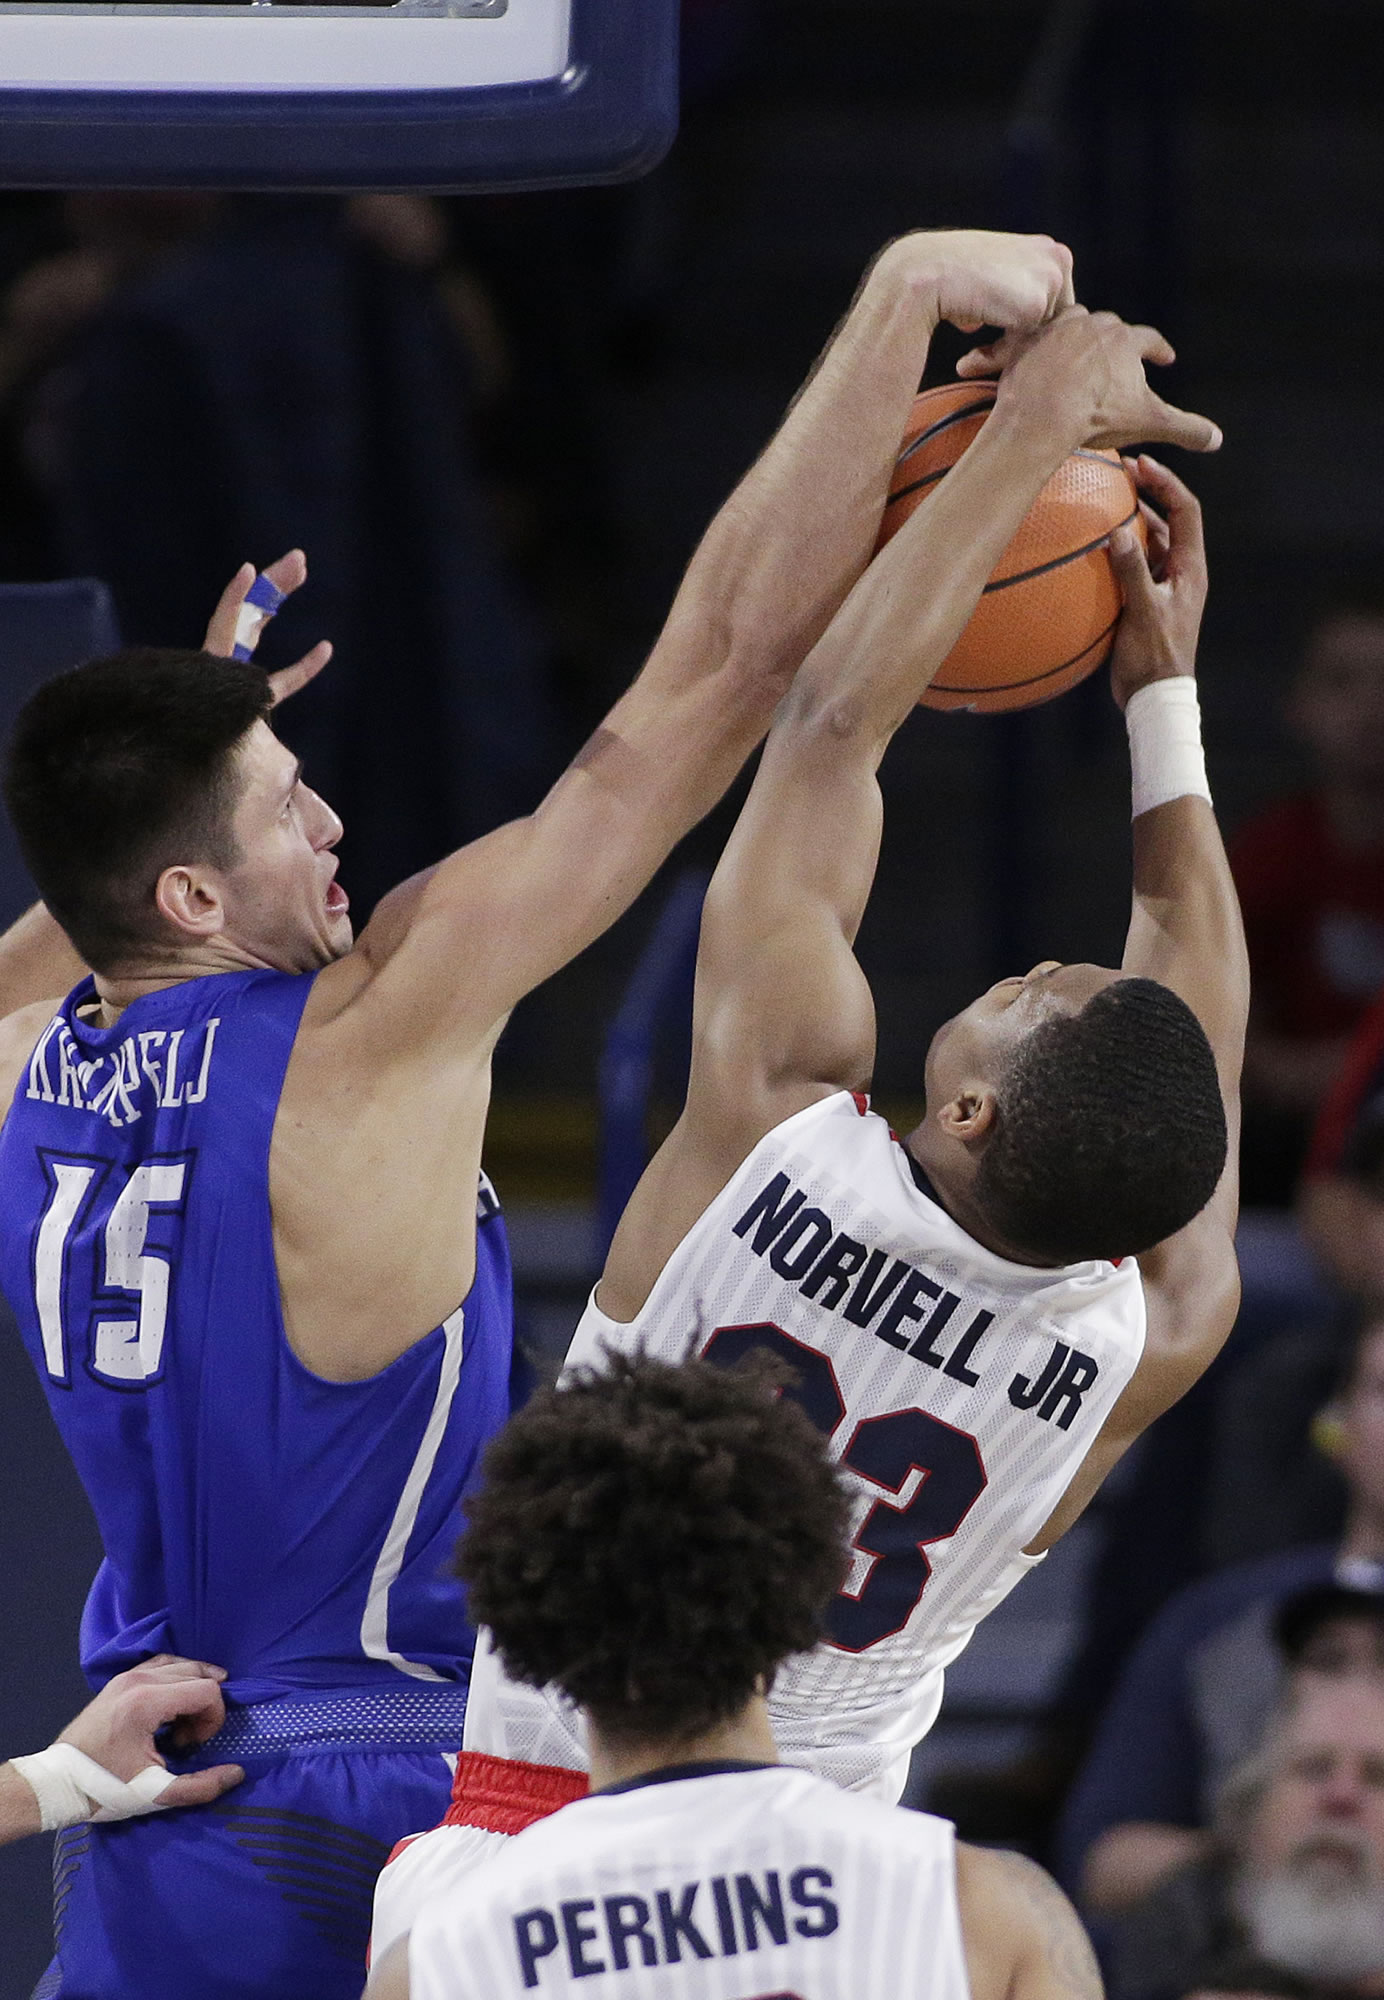 Creighton forward Martin Krampelj (15) and Gonzaga guard Zach Norvell Jr. go after a rebound during the second half of an NCAA college basketball game in Spokane, Wash., Friday, Dec. 1, 2017. Gonzaga won 91-74.